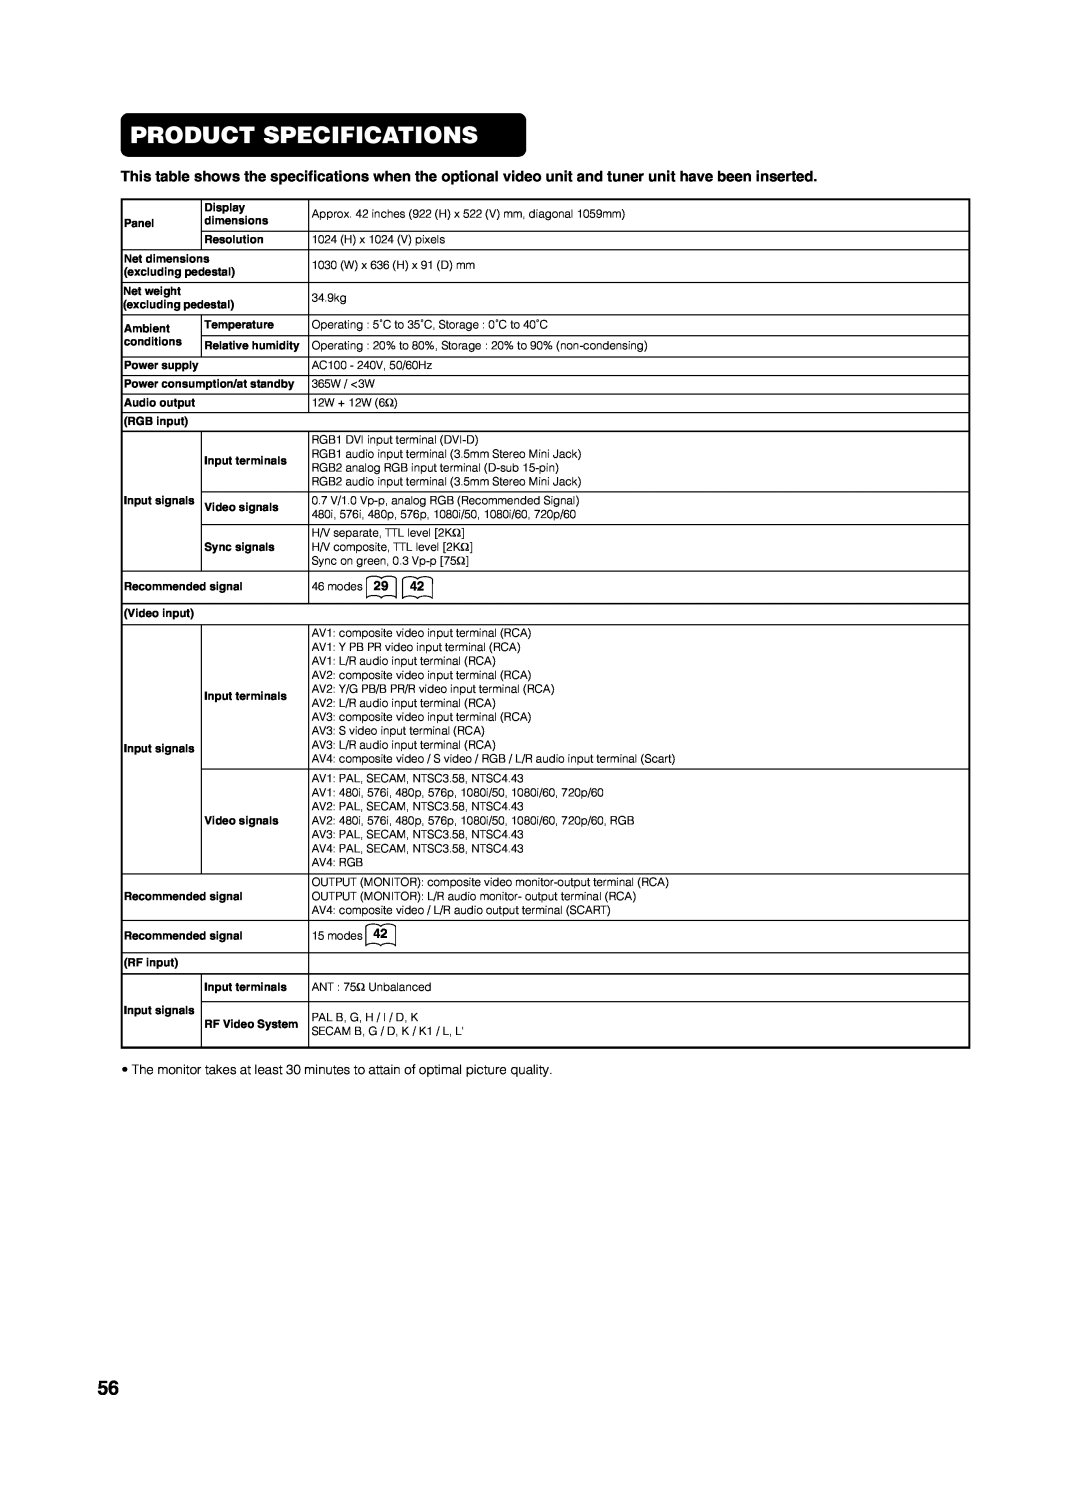 Yamaha PDM-4210E user manual Product Specifications 